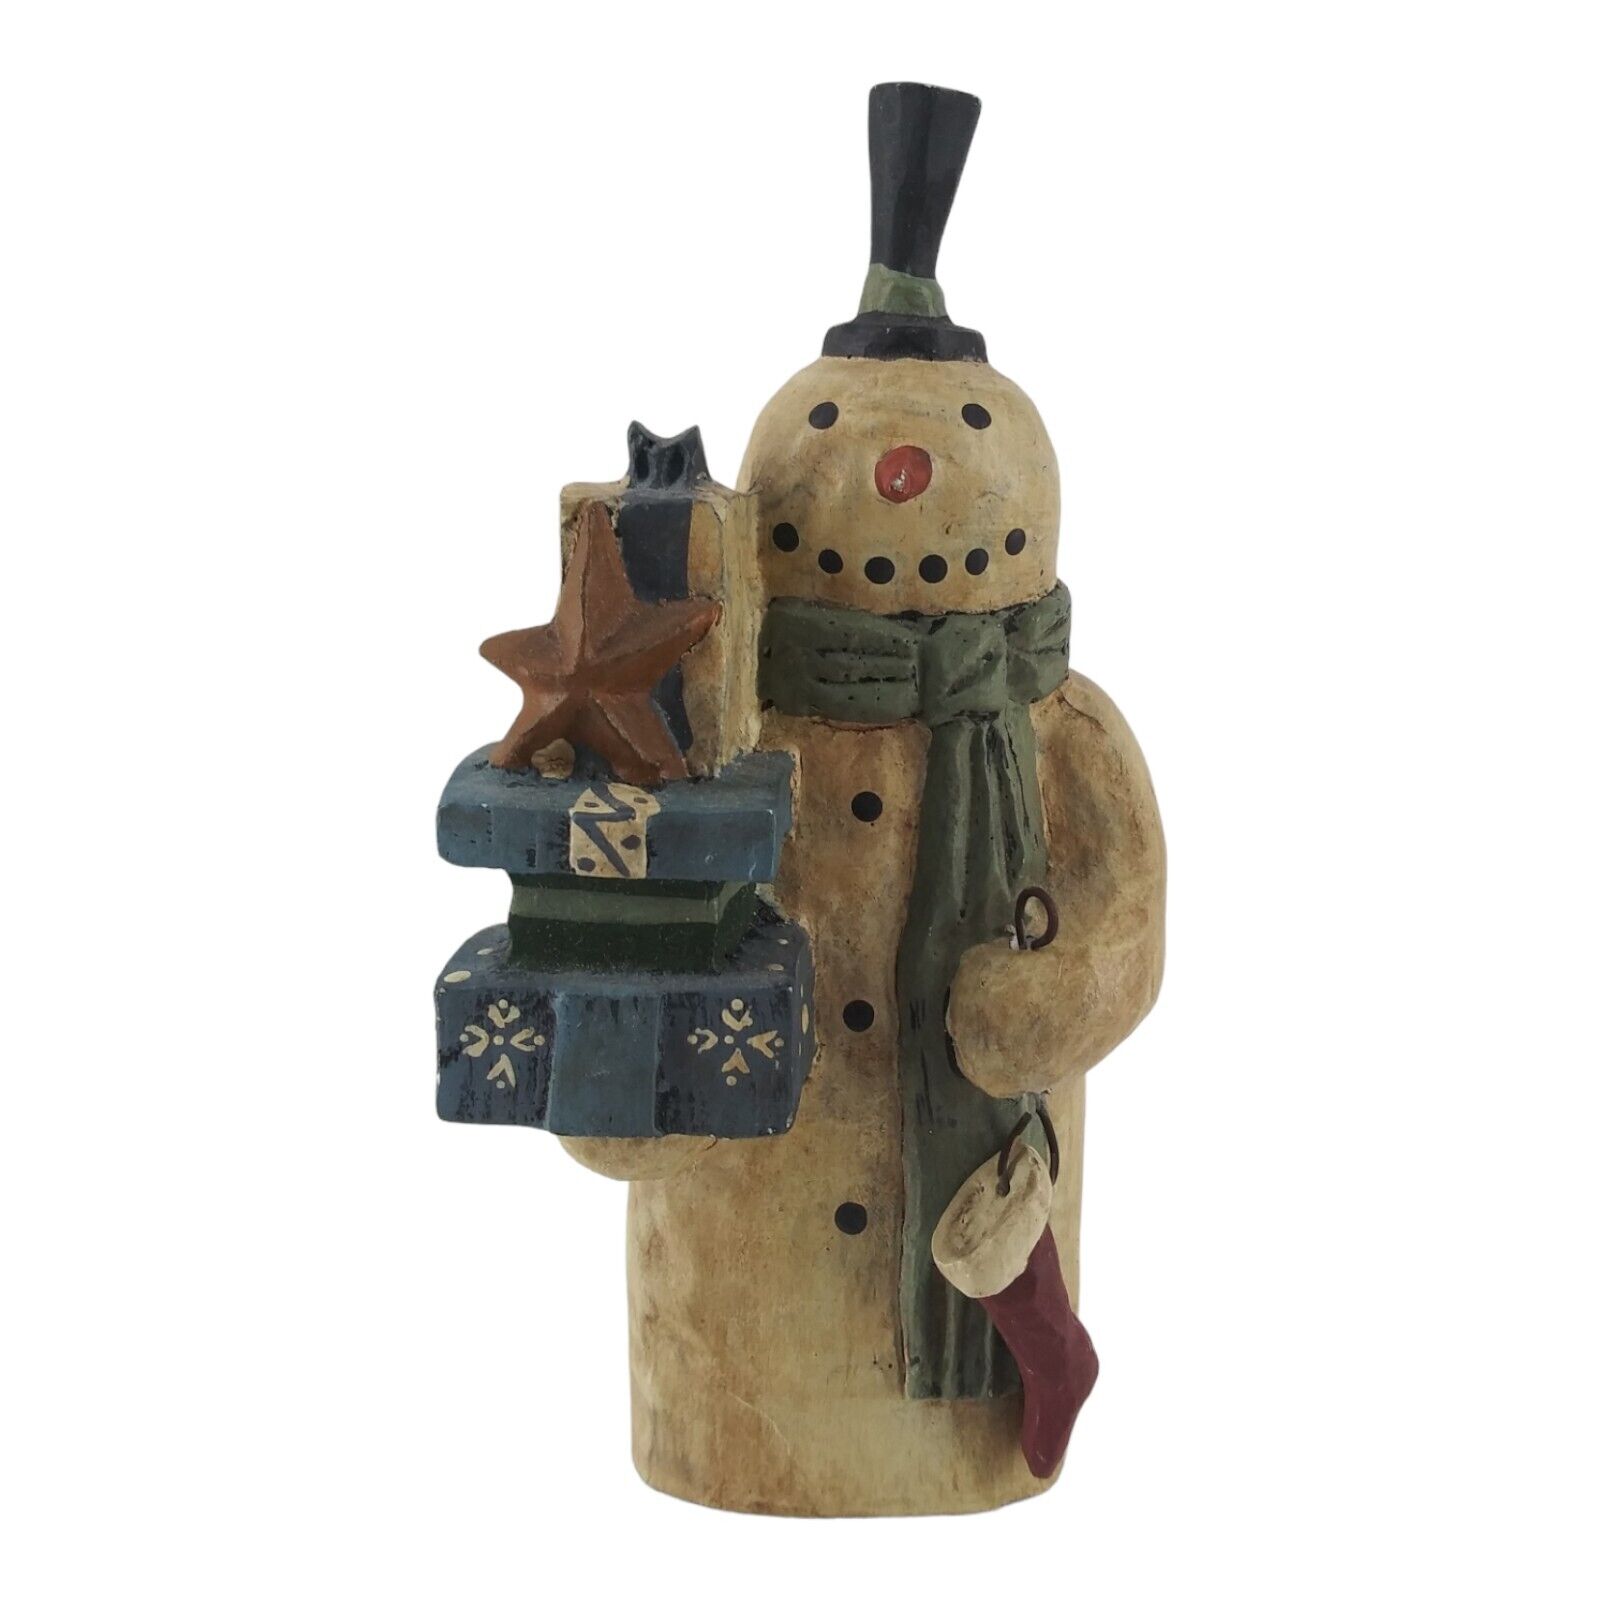 Greg Guedel Midwest of Cannon Falls FolkStar Snowman Figurine Presents Stocking